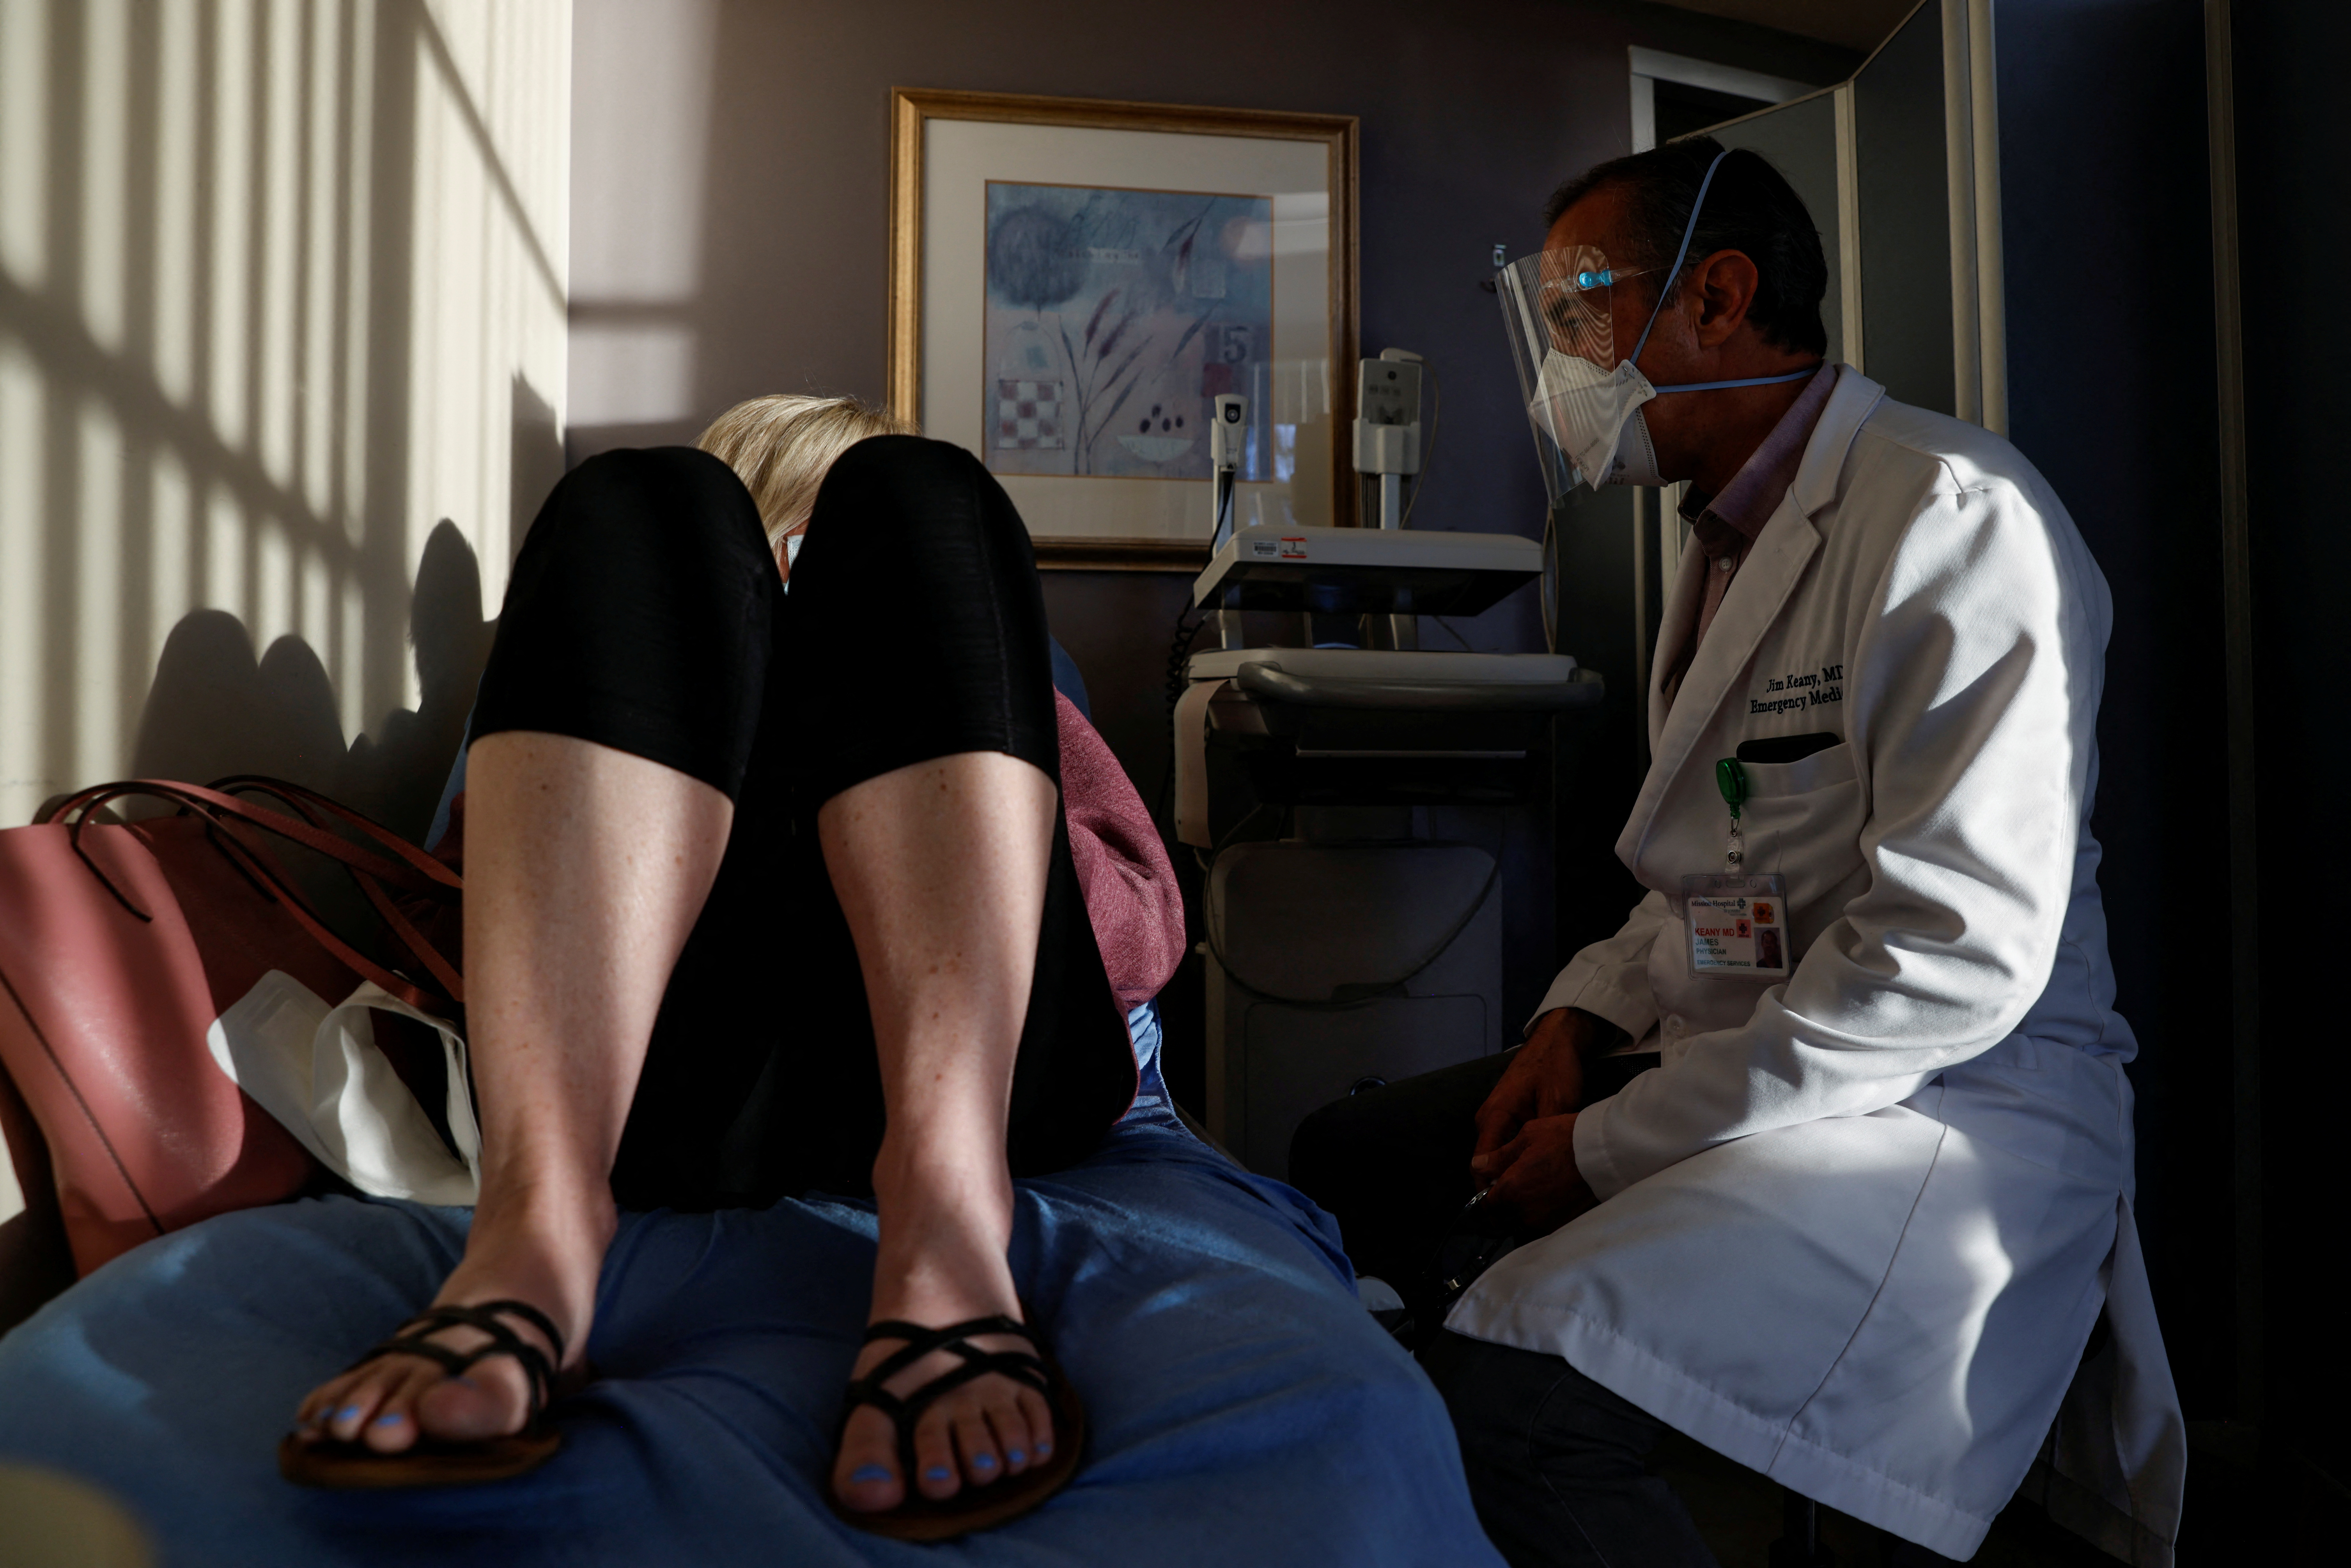 Emergency room doctor Jim Keany treats a coronavirus patient in a respiratory isolation room. REUTERS/Shannon Stapleton